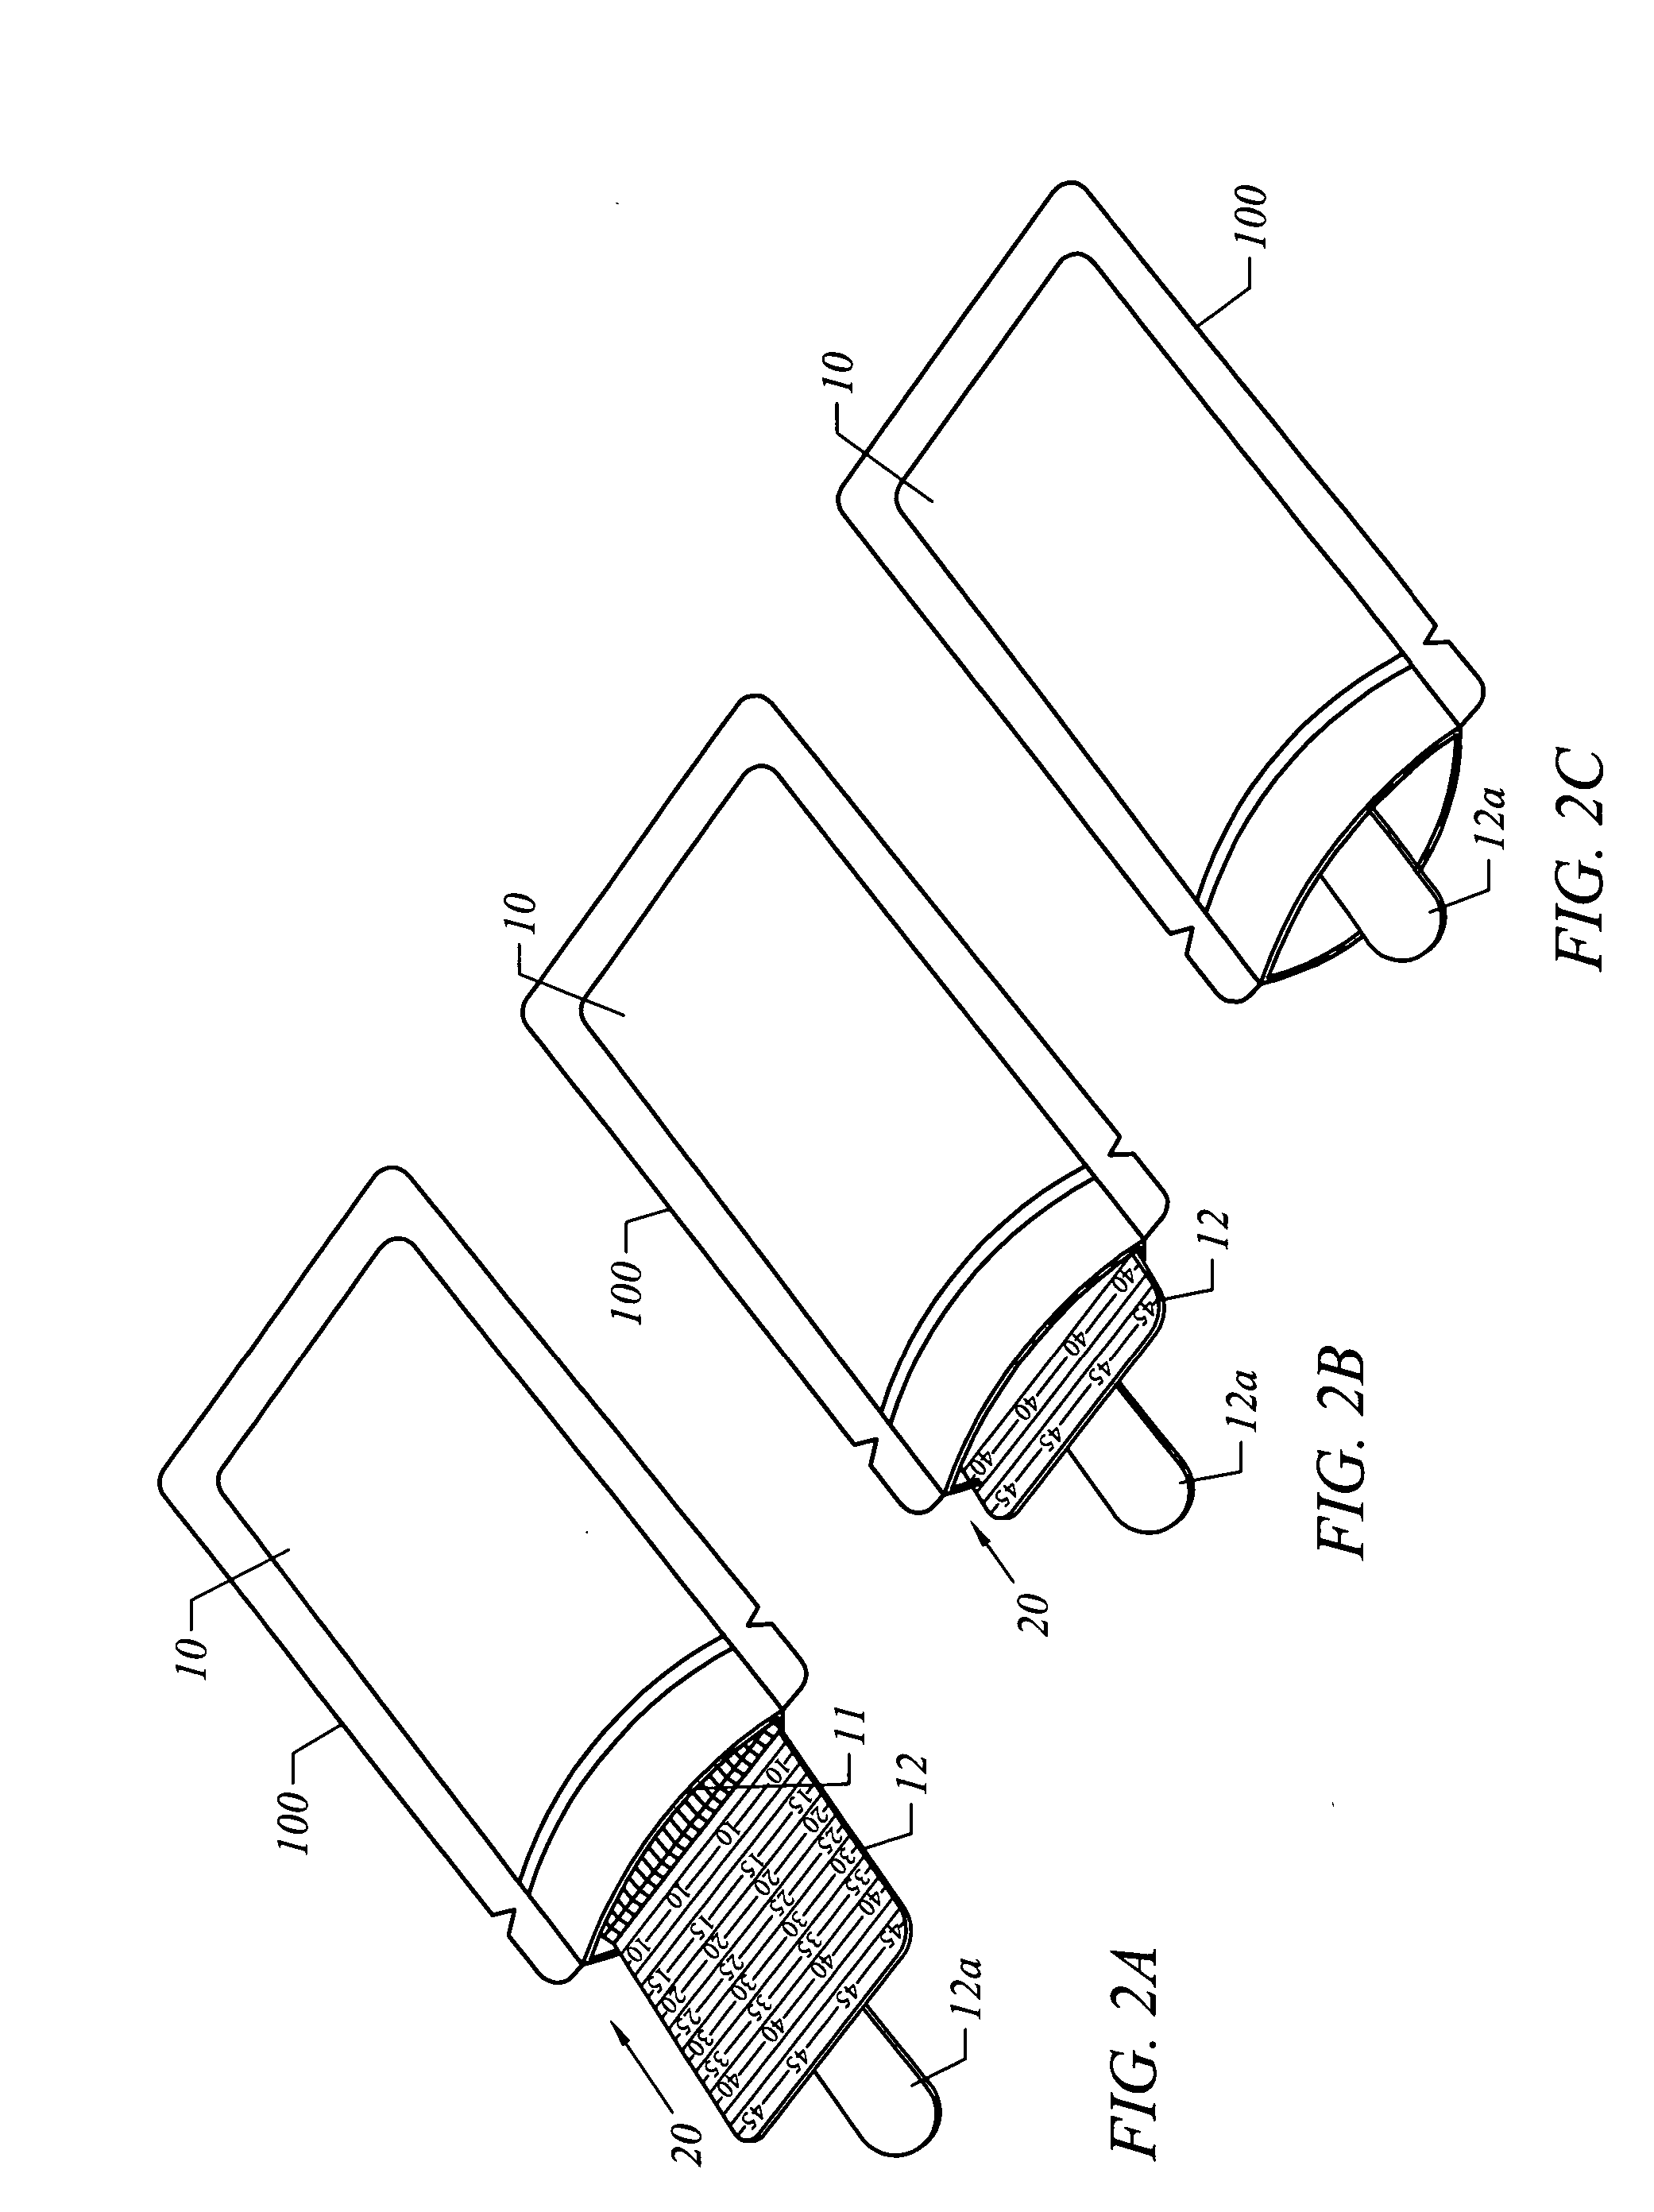 Shielded transport for multiple brachytheapy implants with integrated measuring and cutting board